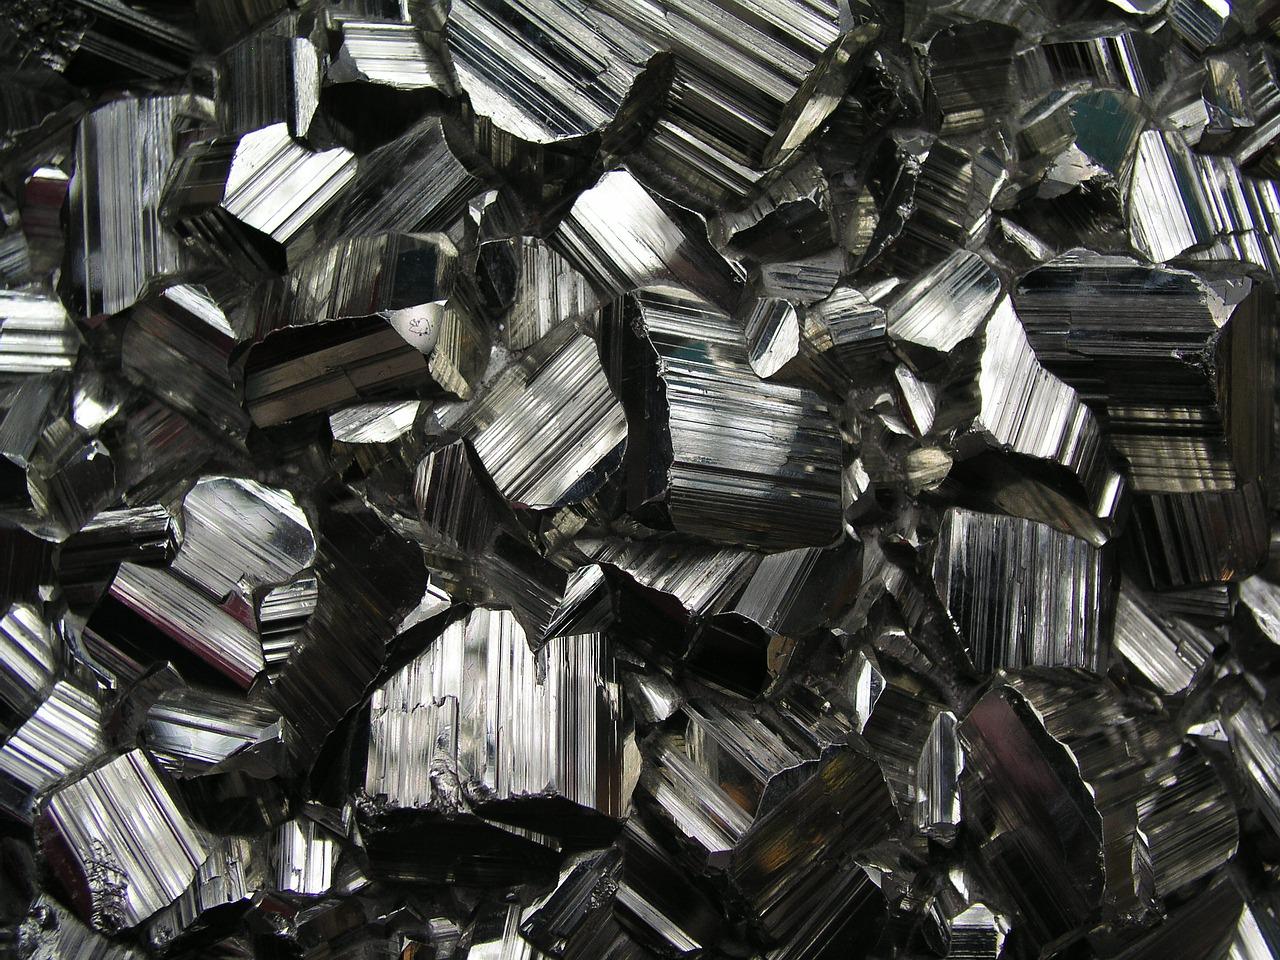 How to tell if Black Tourmaline is real